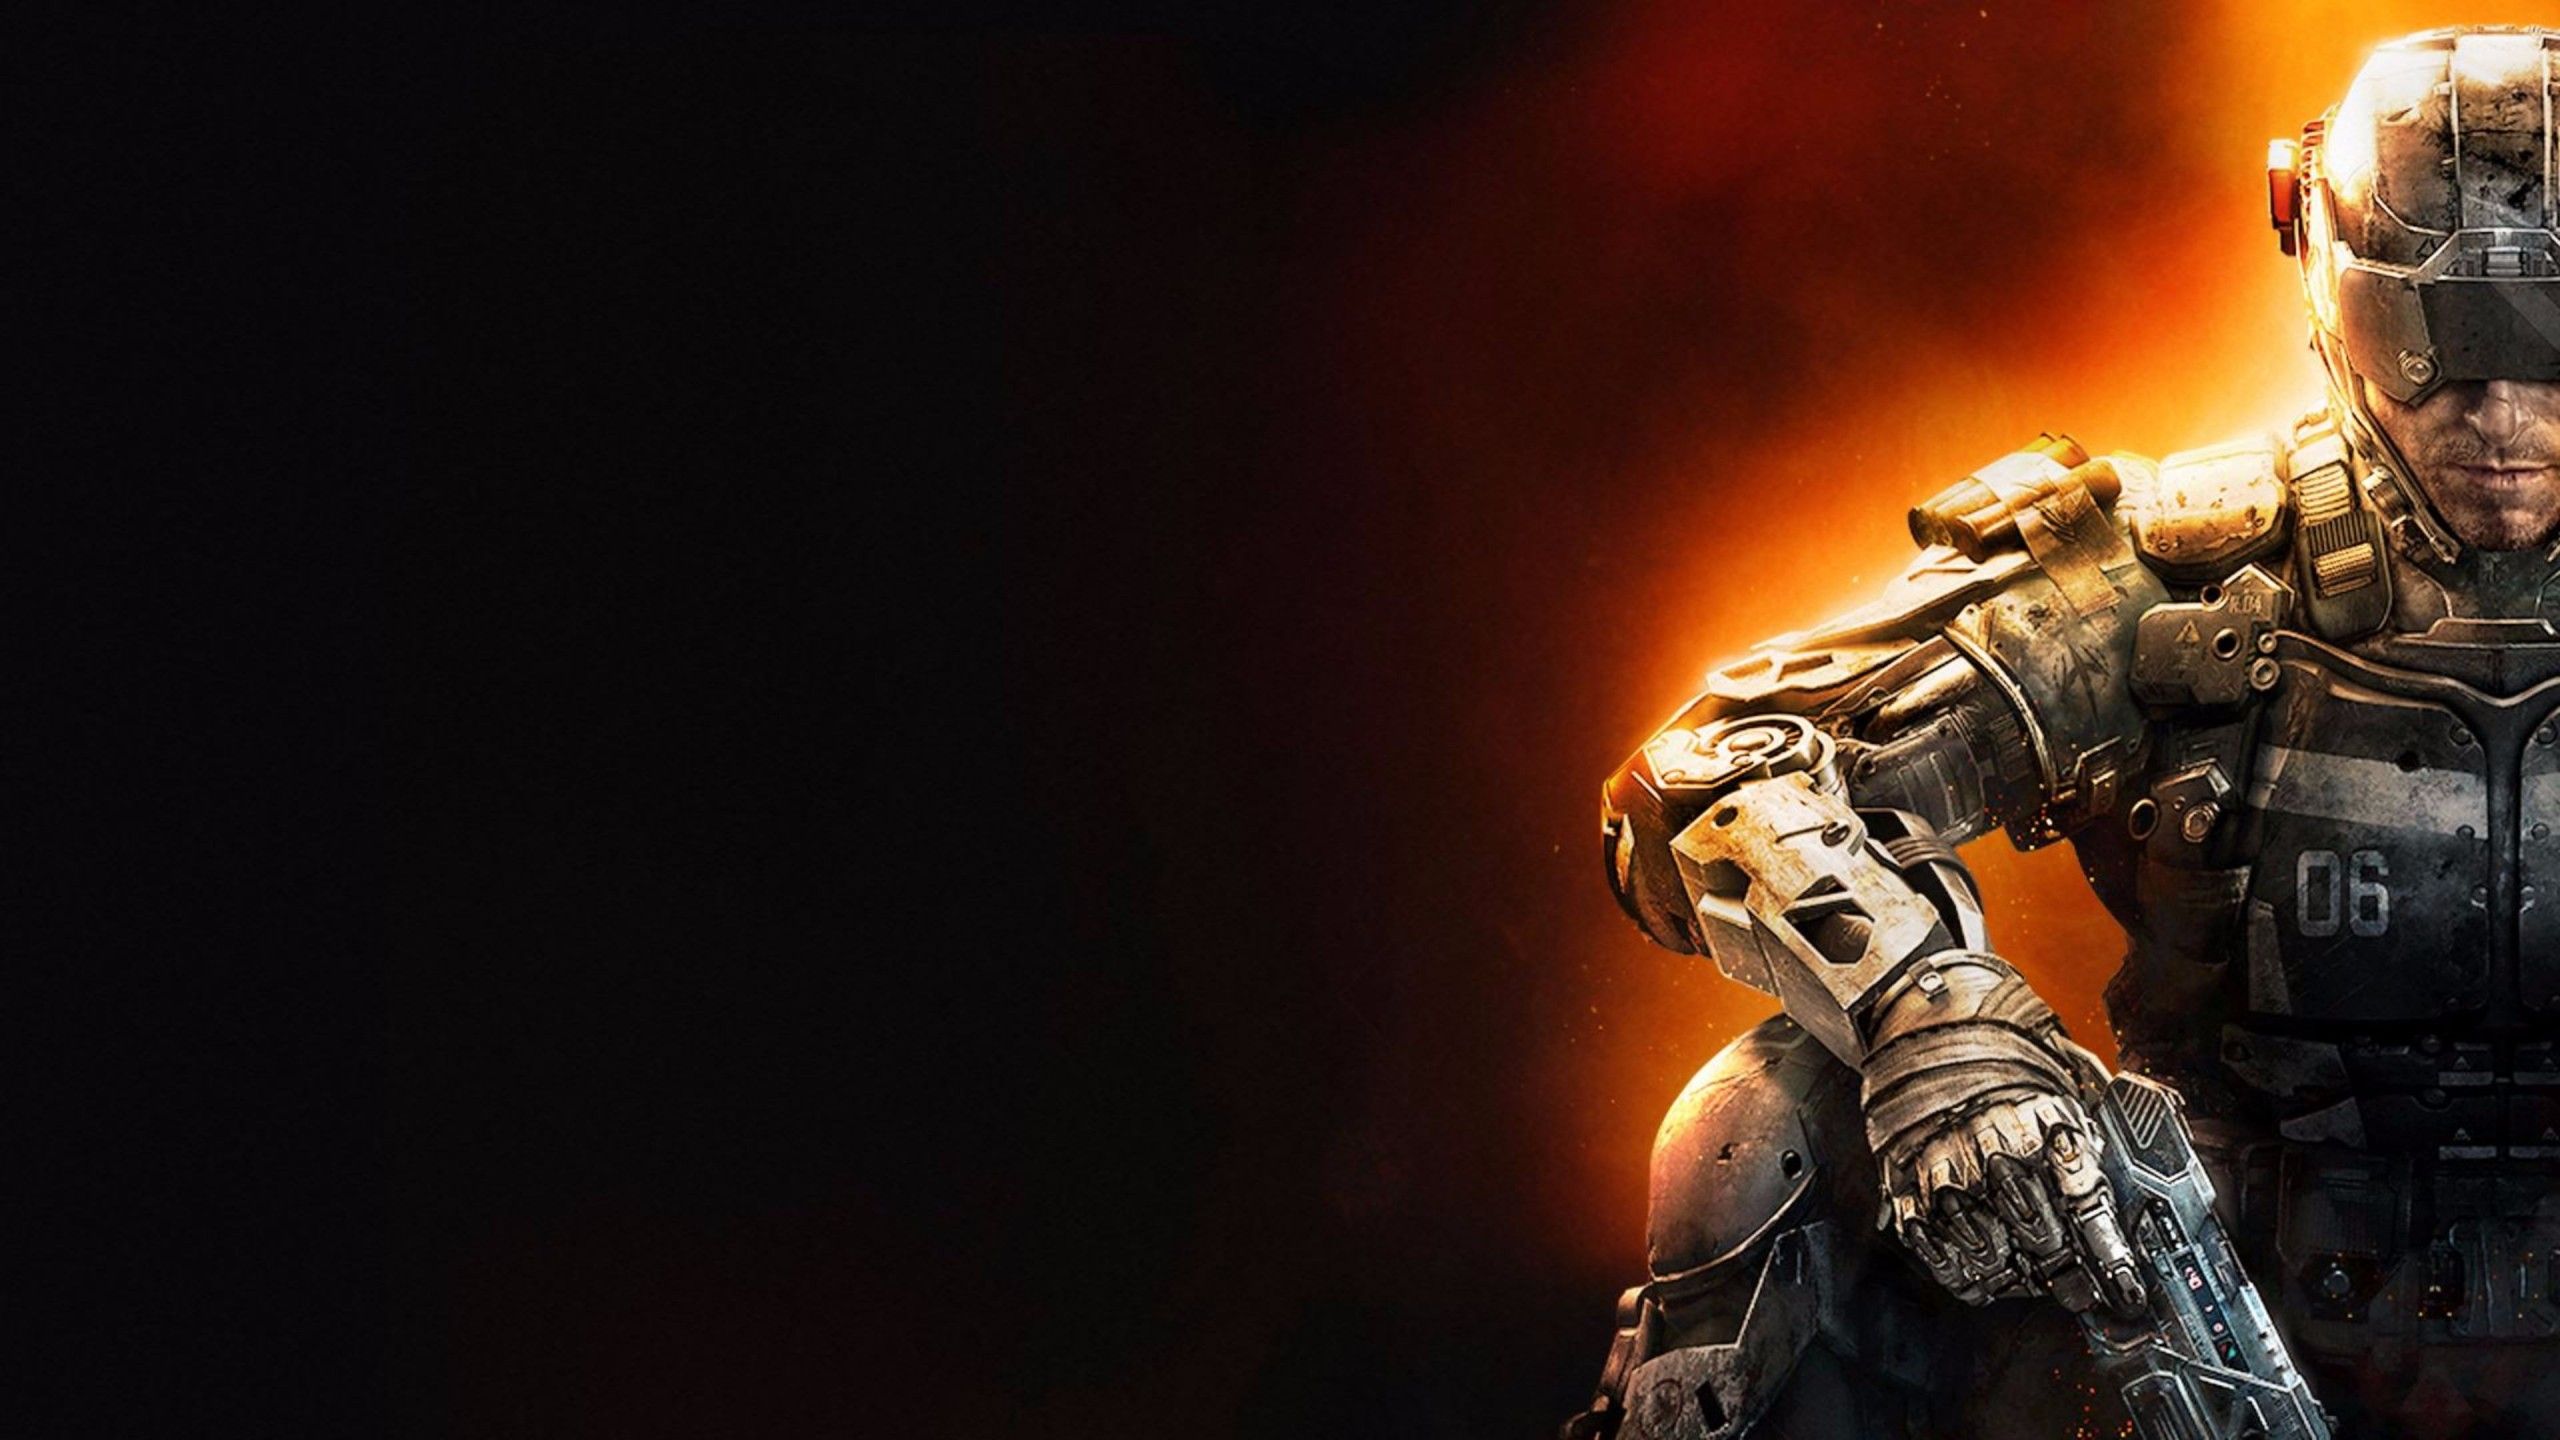 Wallpaper : video games, PC gaming, Call of Duty Black Ops III